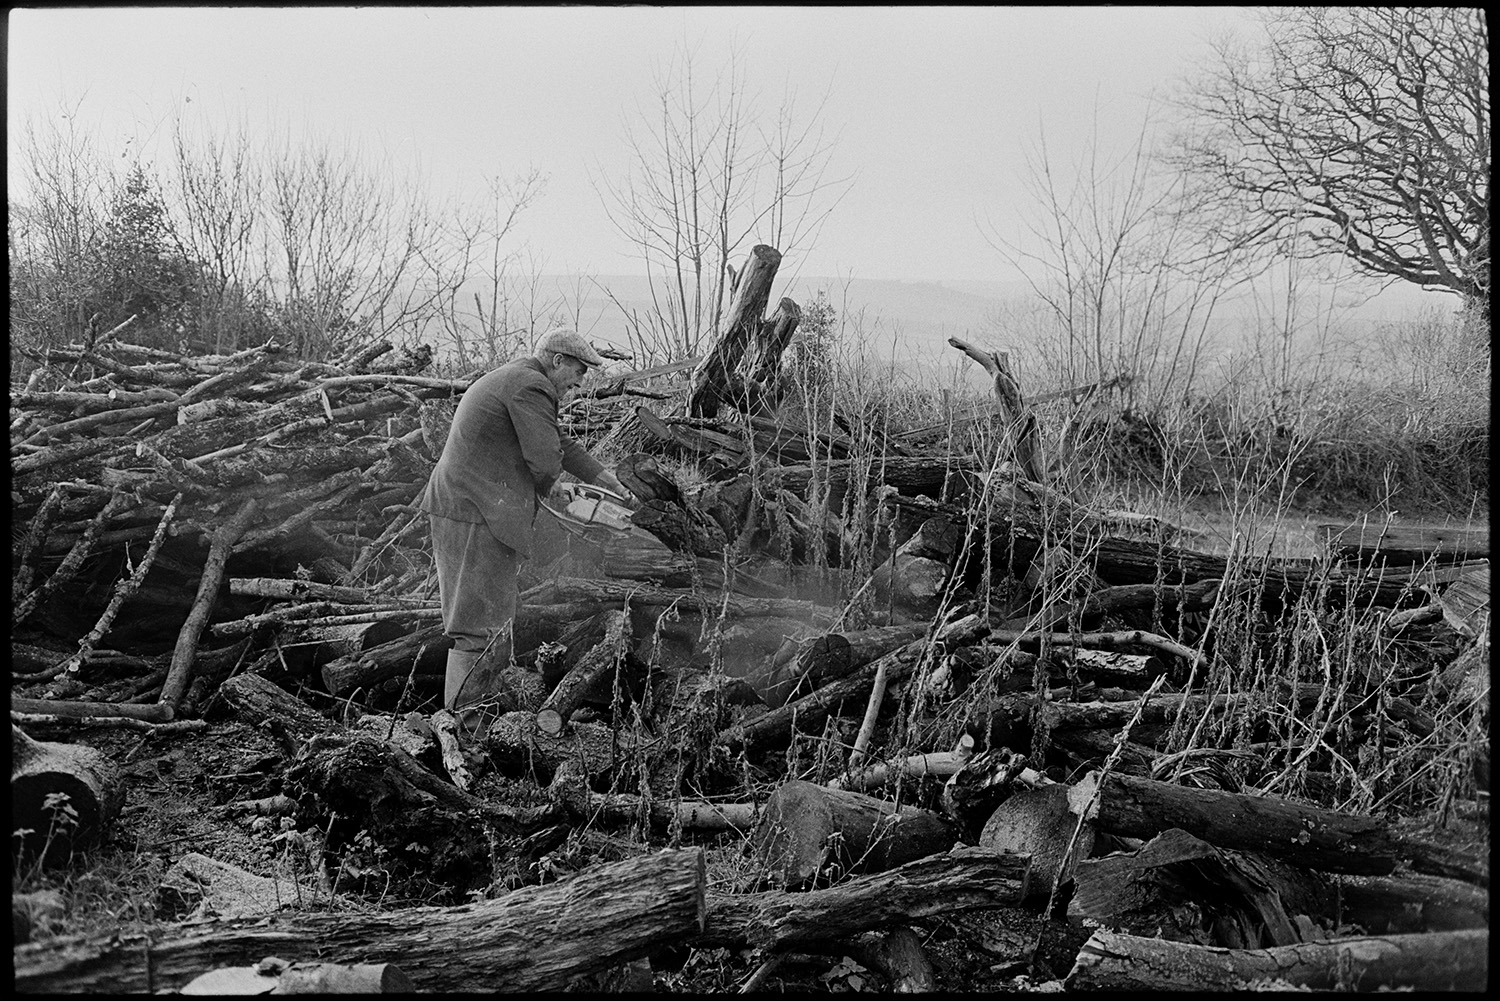 Farmer sawing logs, woodpile with chainsaw. 
[George Ayre sawing up logs in a woodpile at Ashwell, Dolton, using a chainsaw.]